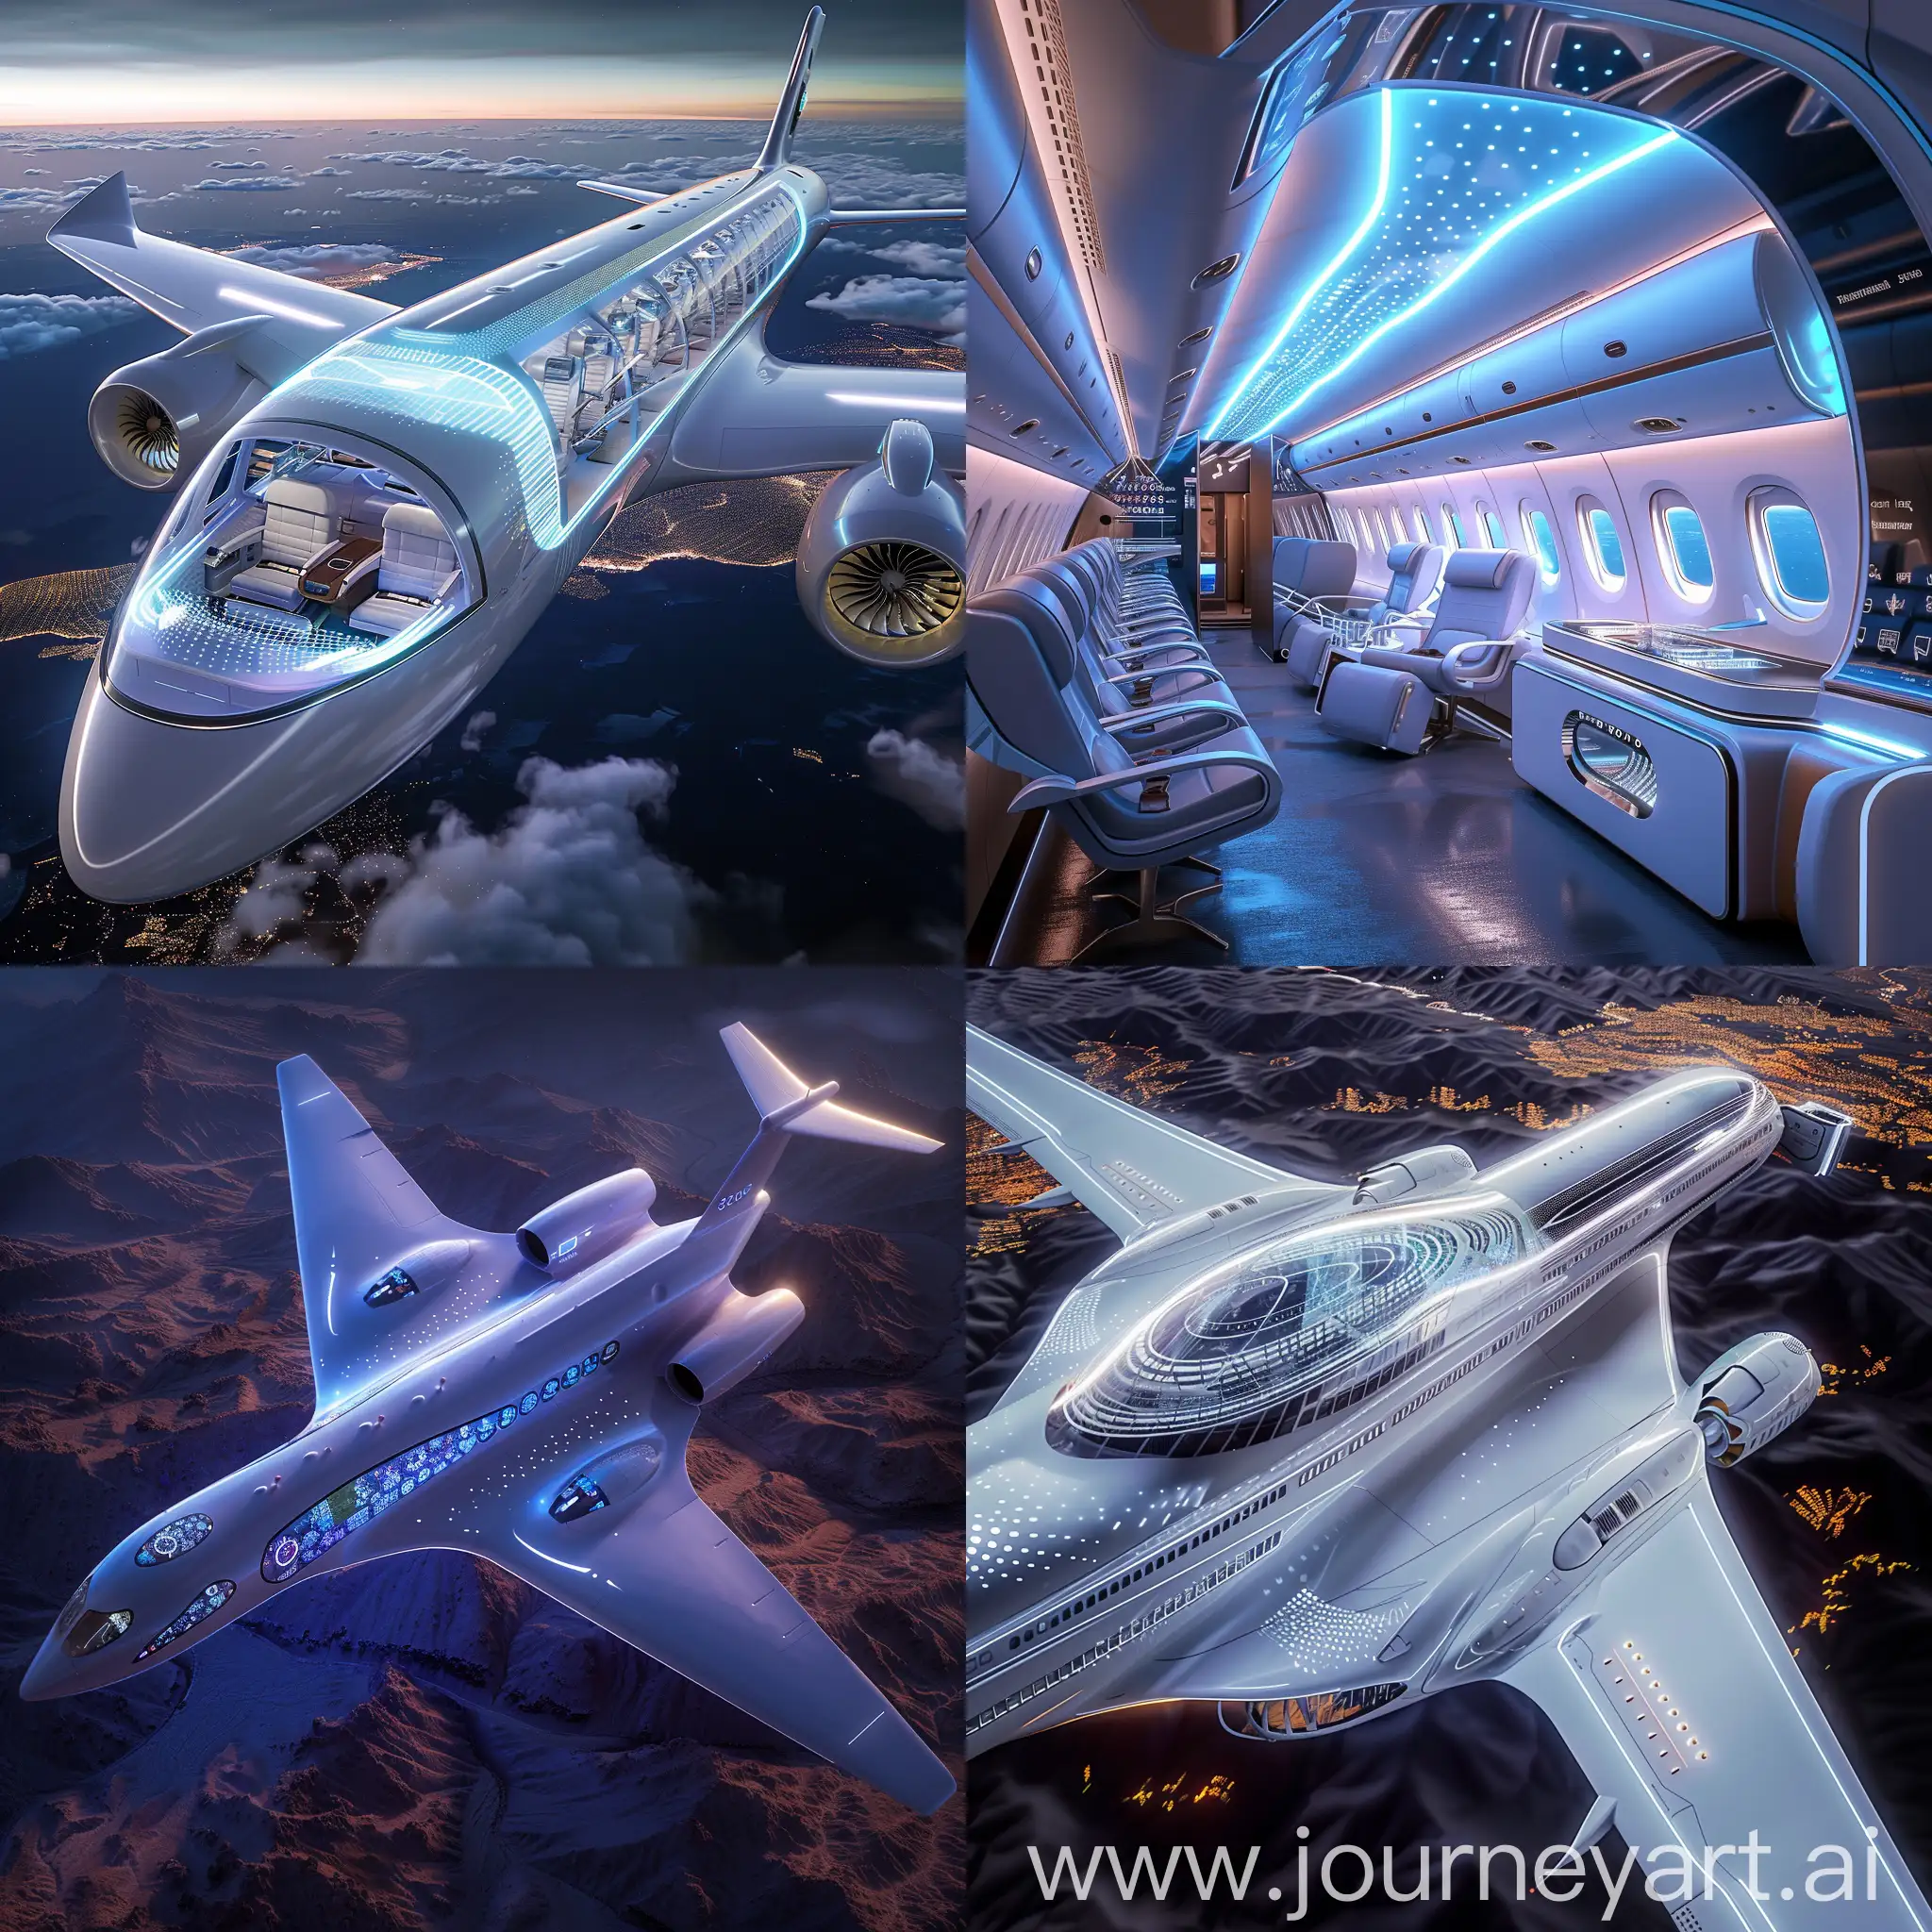 Futuristic-Passenger-Aircraft-Biometric-Seating-AIpowered-Entertainment-and-Smart-Climate-Control